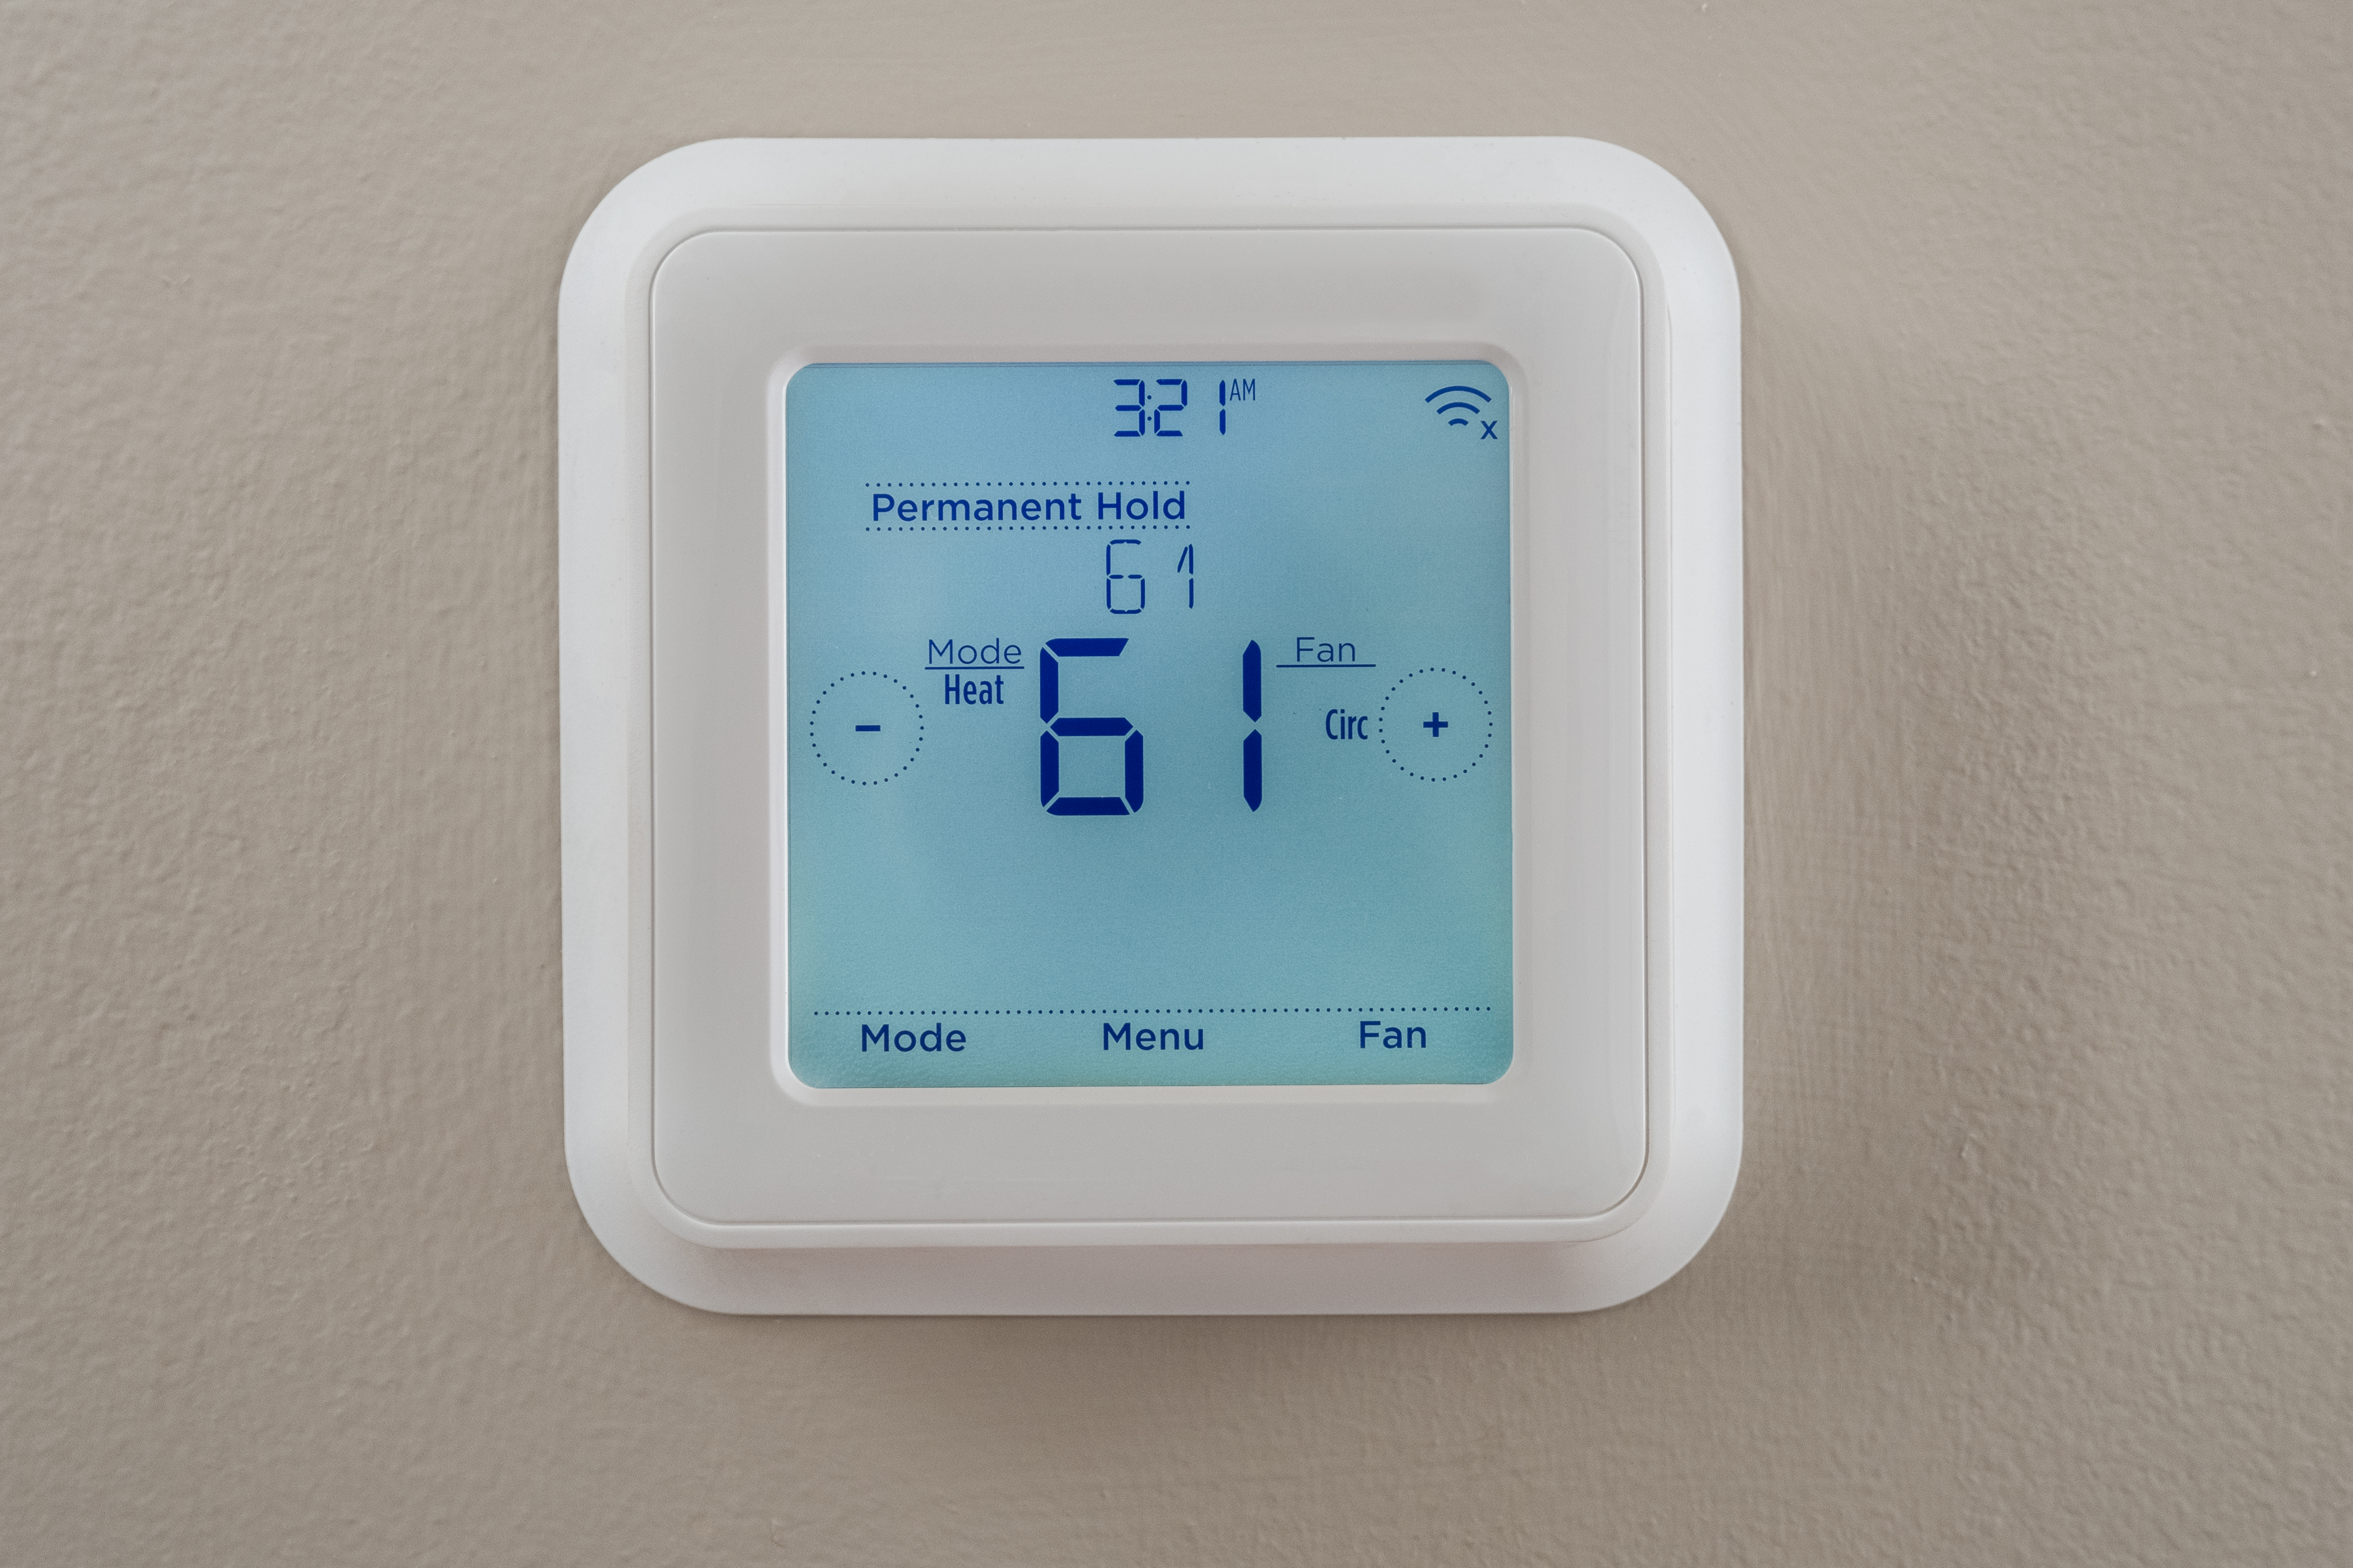 How To Turn On My Honeywell Thermostat How to Change the Temperature on a Honeywell Thermostat | Hunker